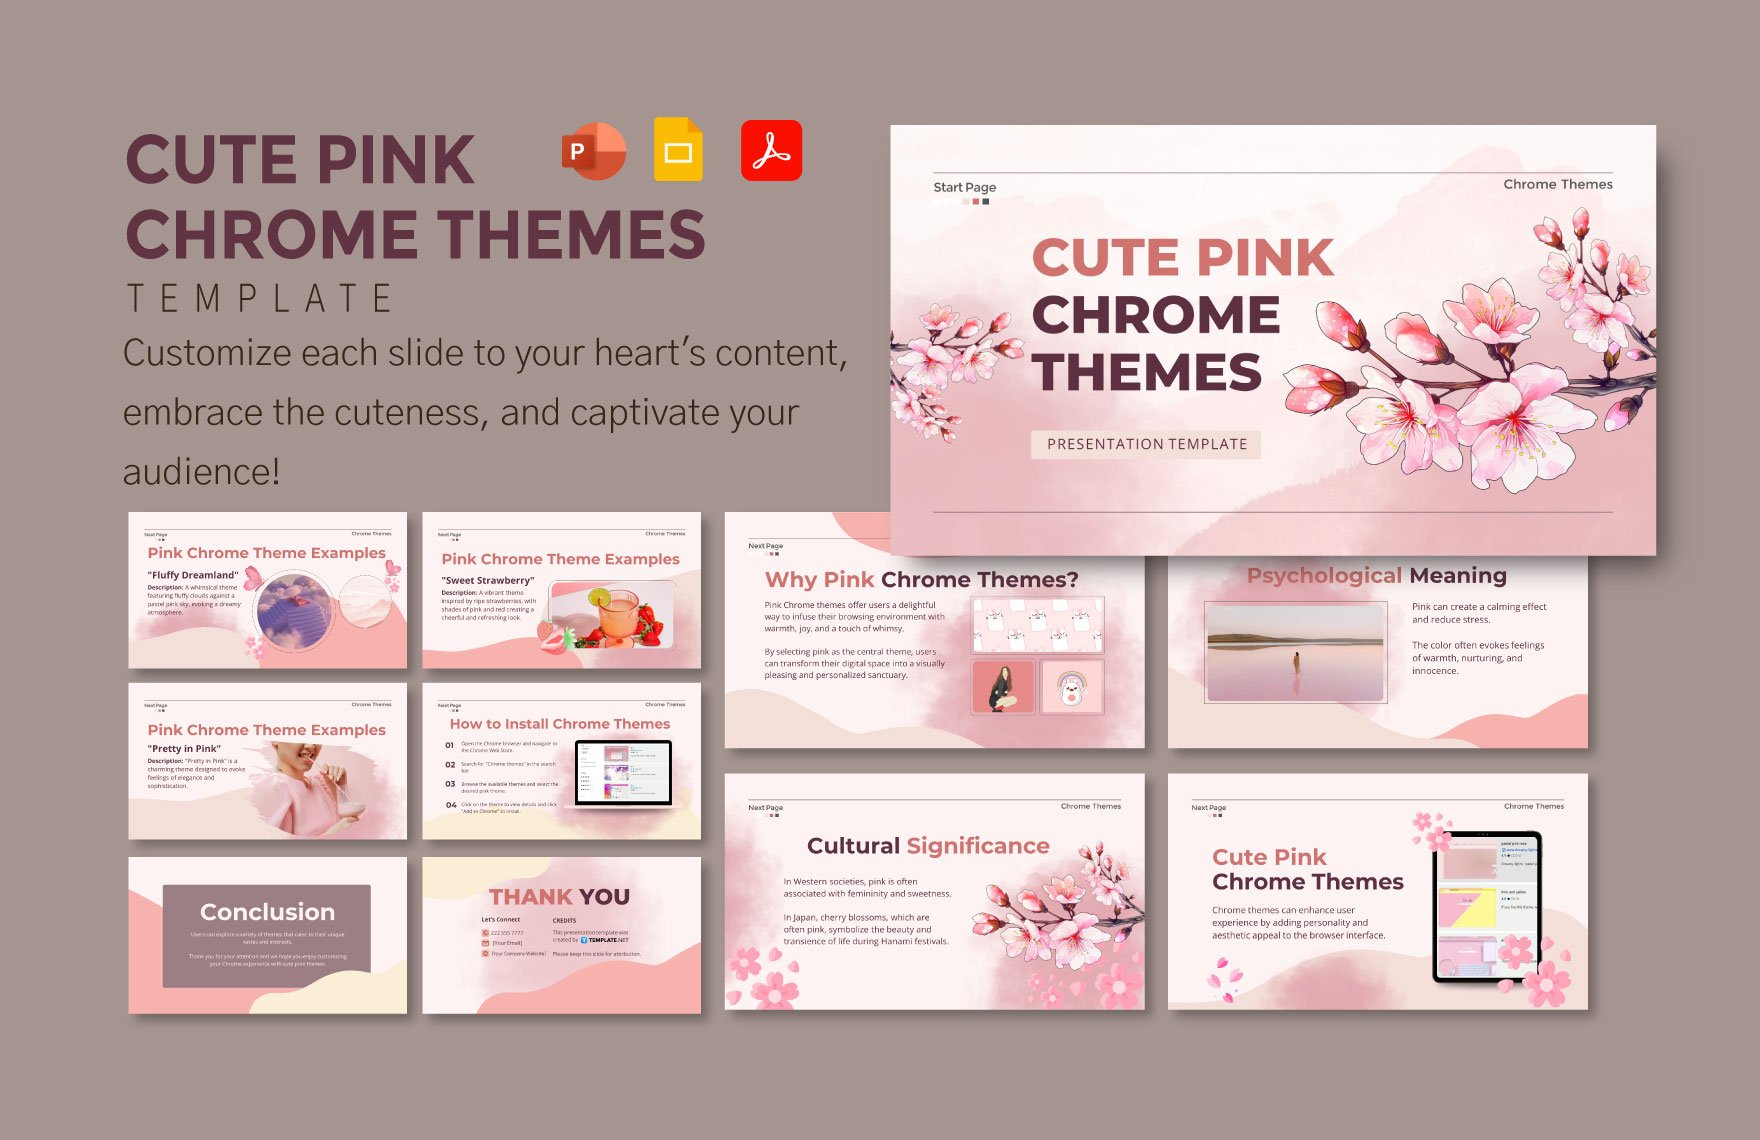 Cute Pink Chrome Themes Template in PDF, PowerPoint, Google Slides